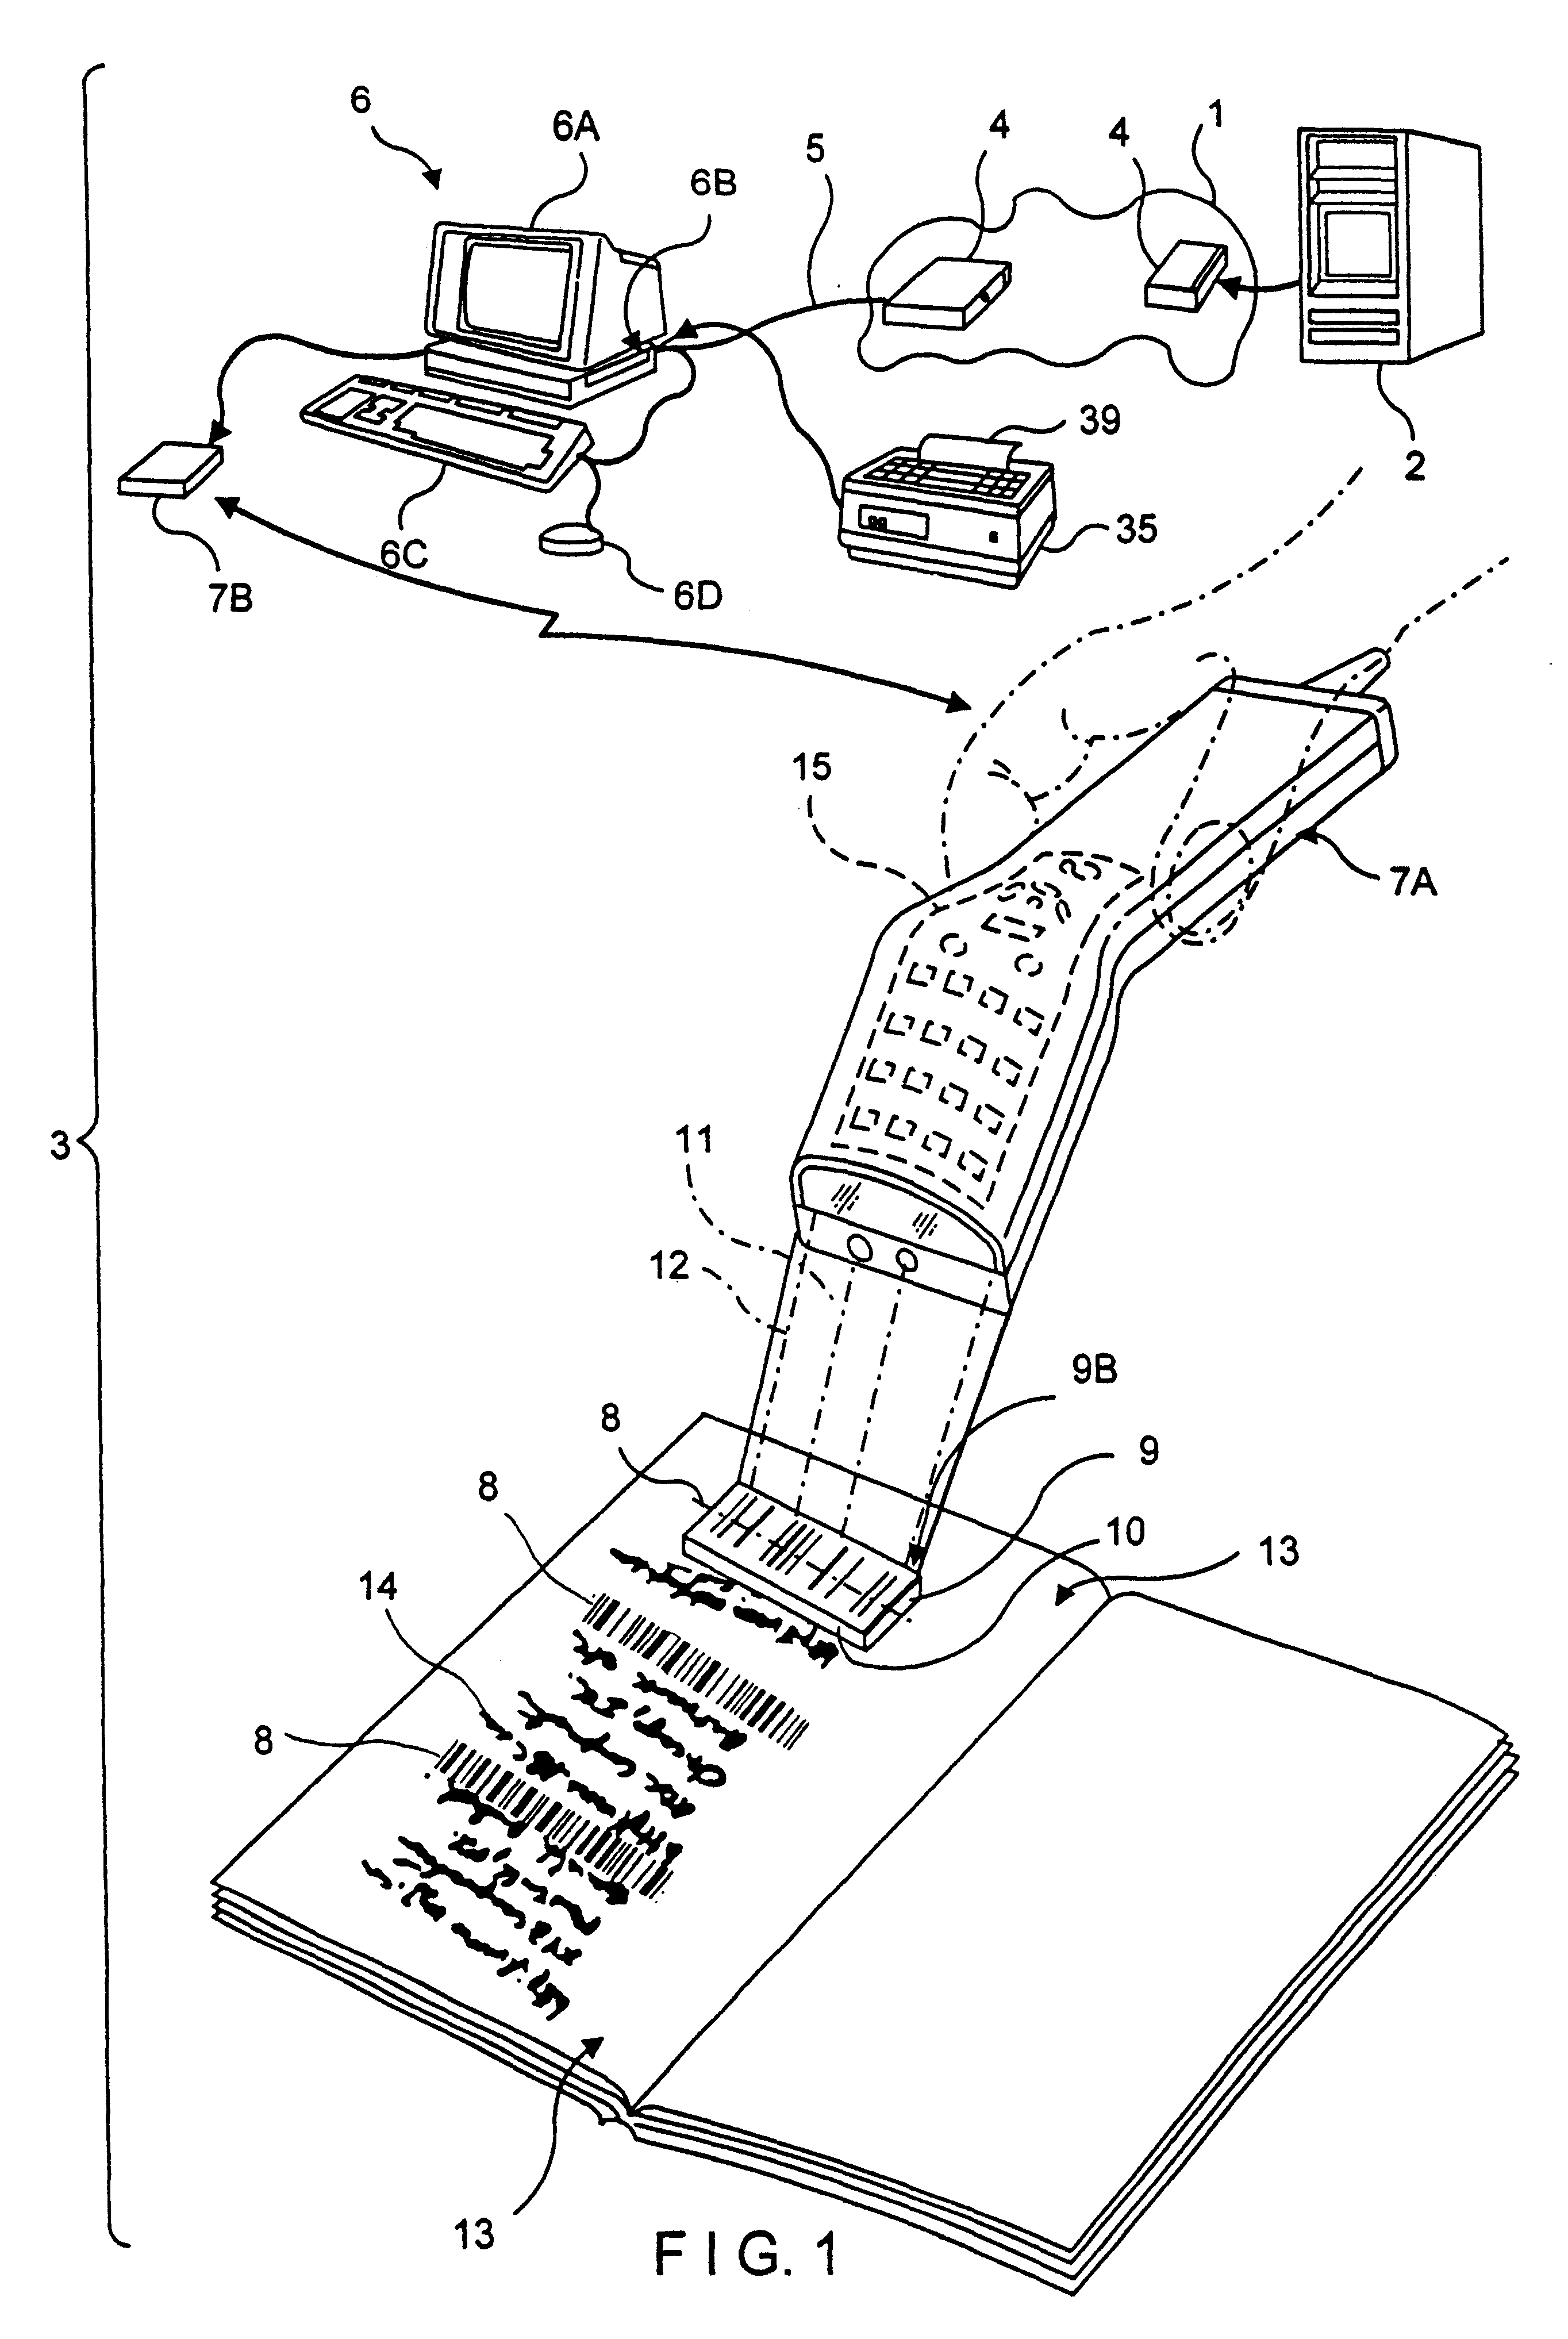 Web-based television system and method for enabling a viewer to access and display HTML-encoded documents located on the World Wide Web (WWW) by reading bar code symbols printed in a WWW-site guide using a wireless bar-code driven remote control device